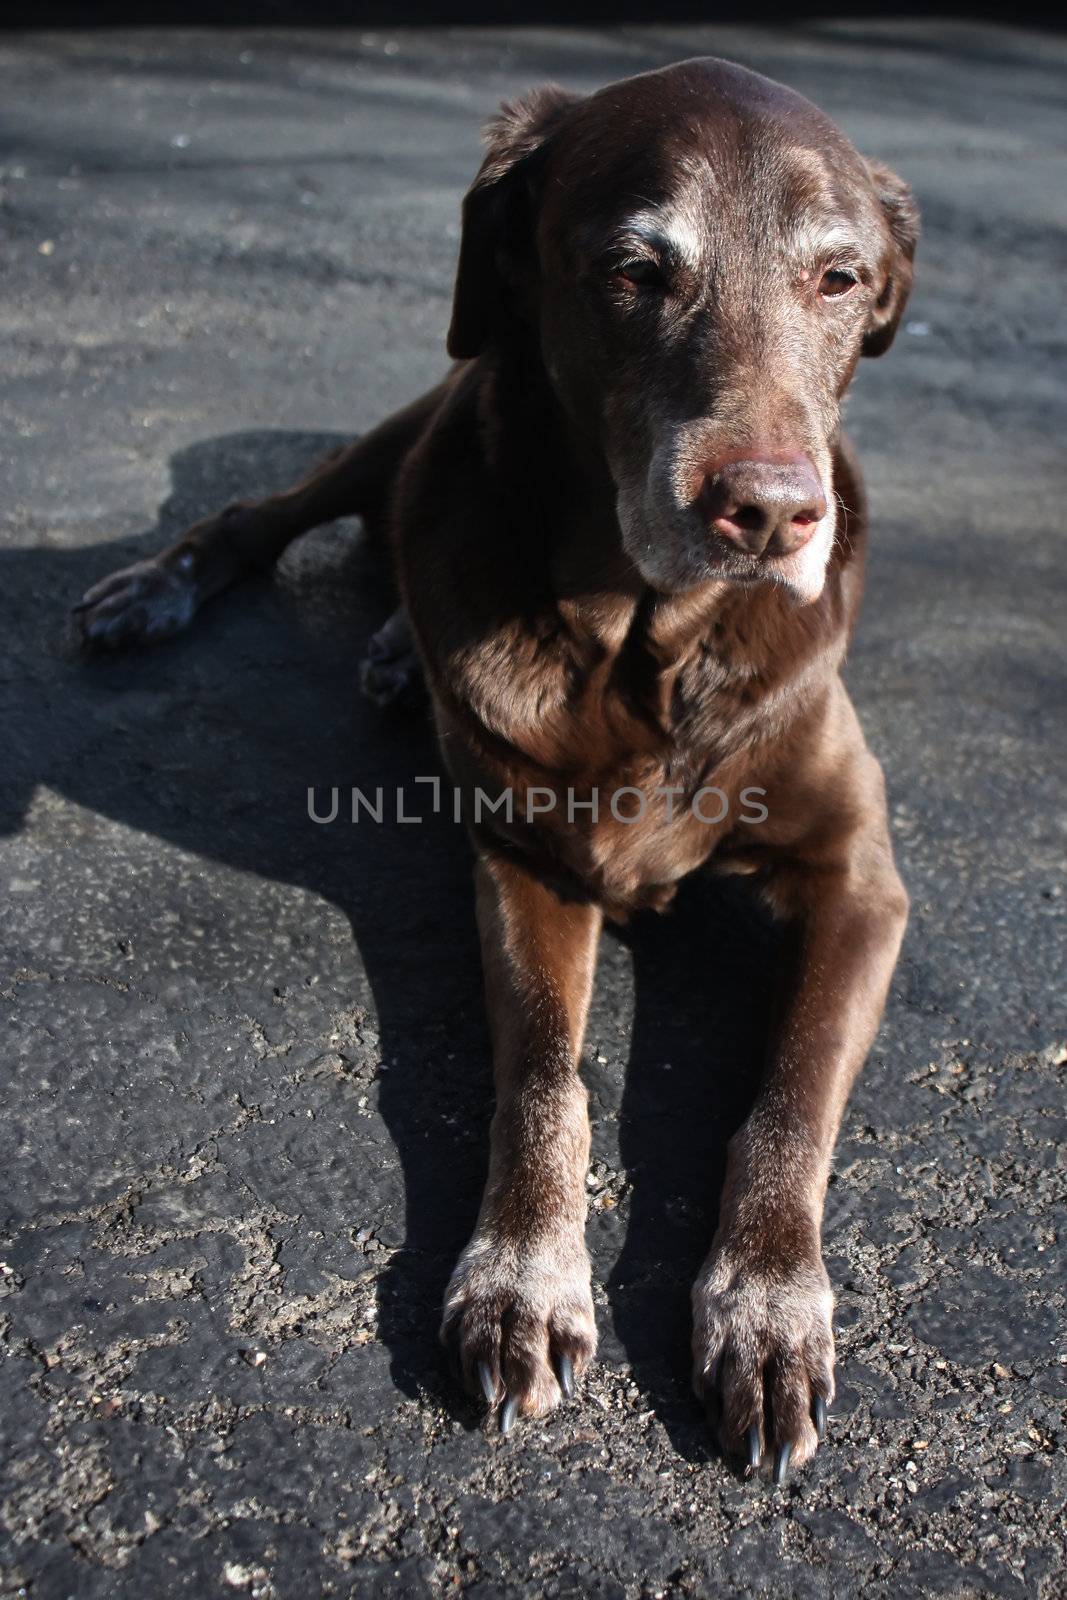 an old chocolate lab lays on blacktop